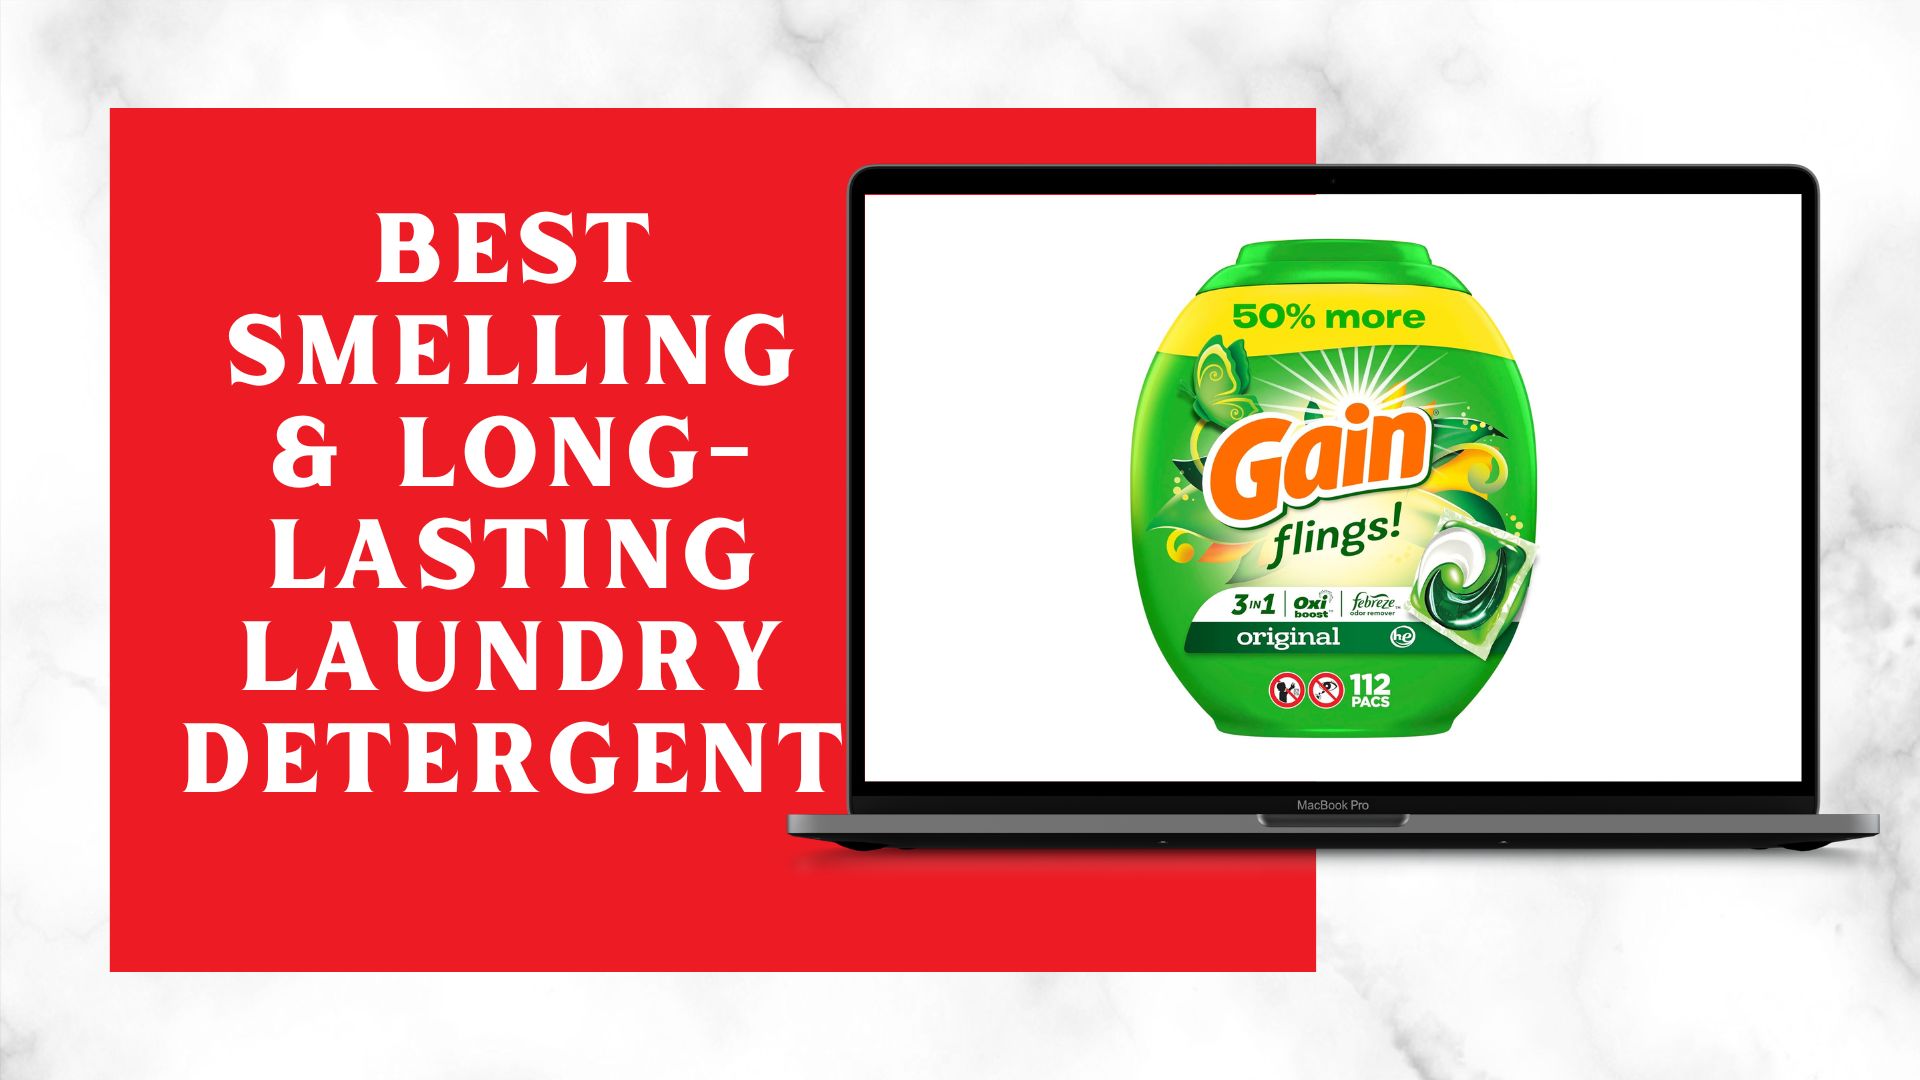 Best Smelling And Long-Lasting Laundry Detergent